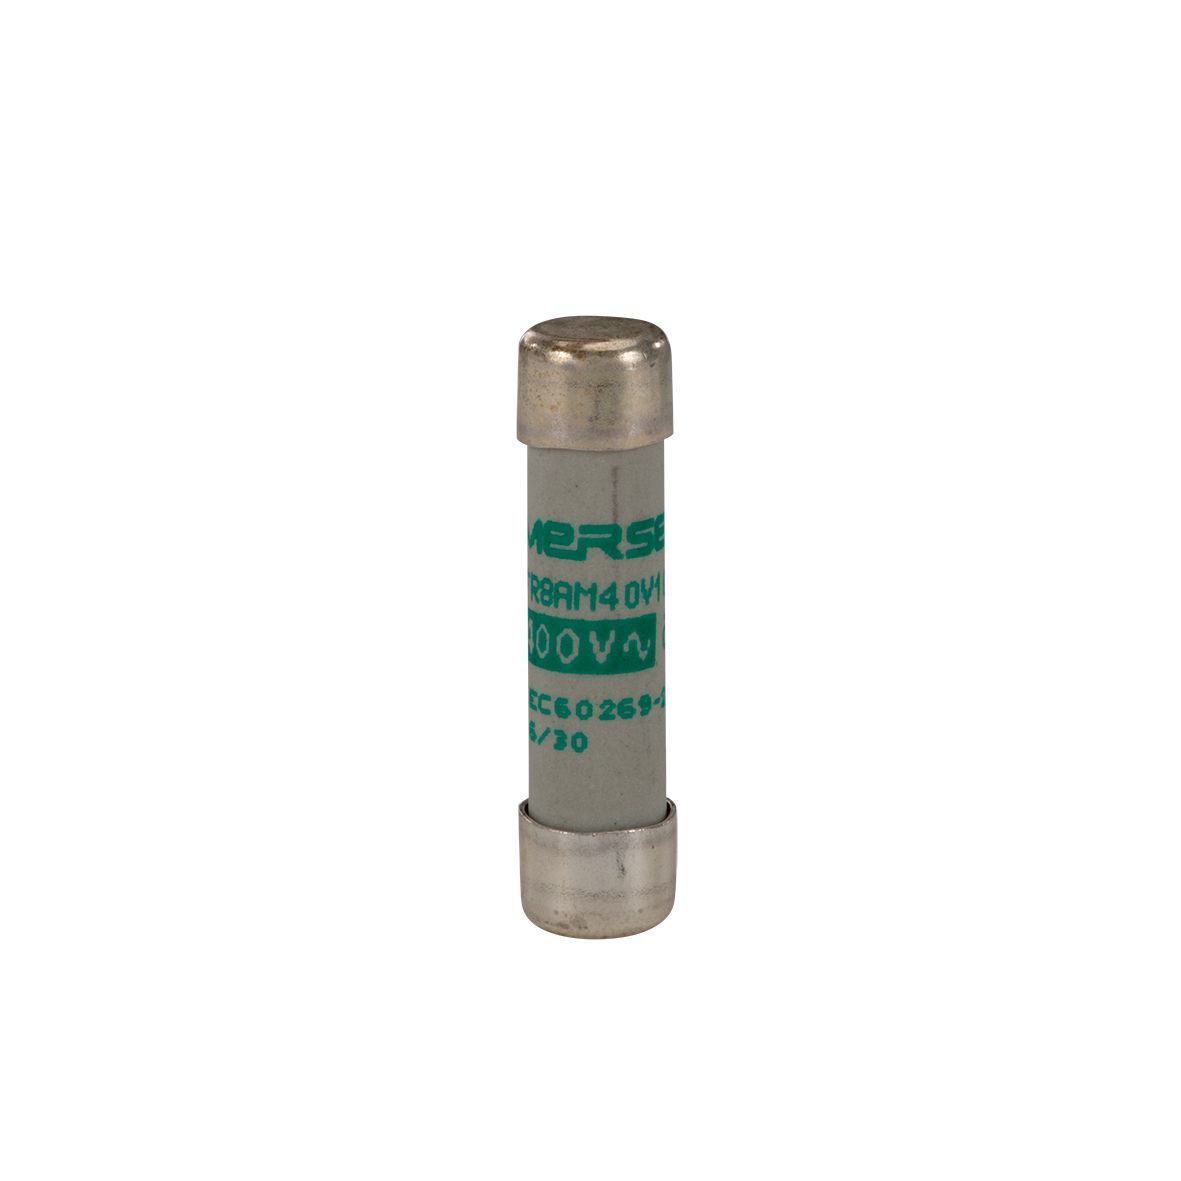 Y214105 - Cylindrical fuse-link gG 400VAC 8.5x31.5, 16A with indicator